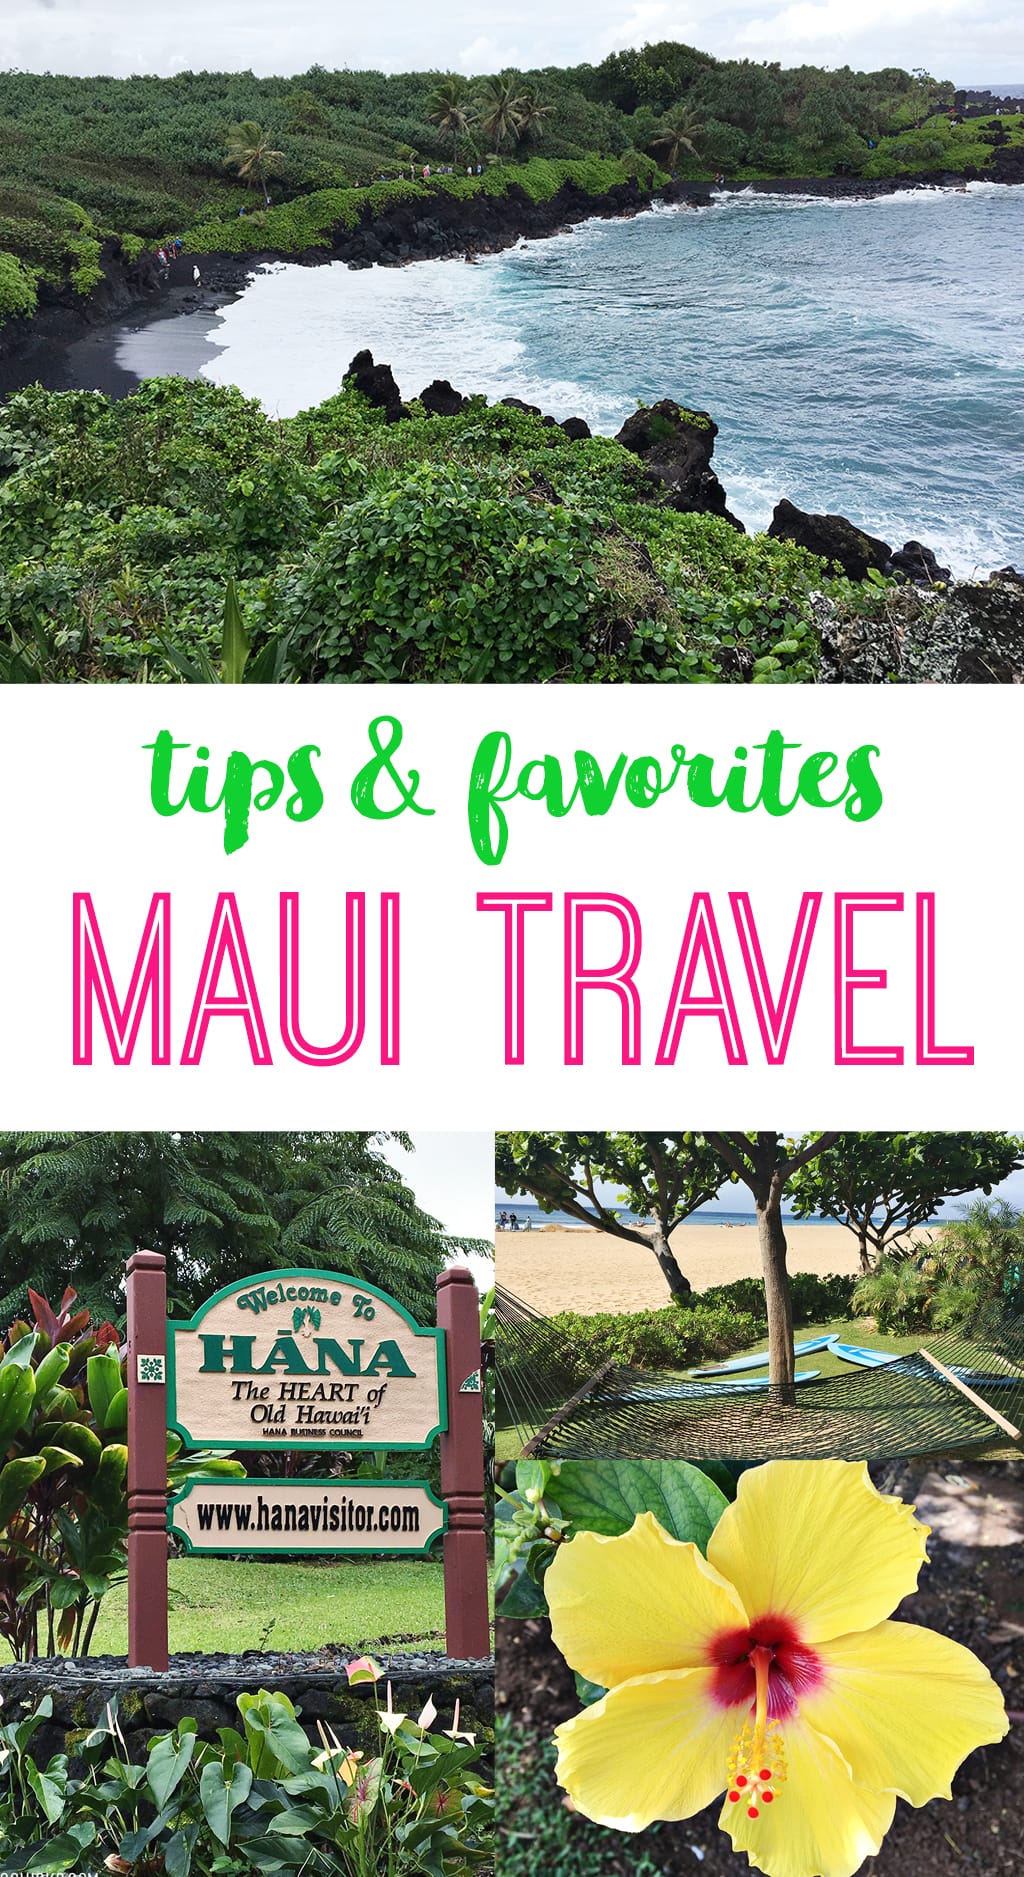 Maui Travel Tips and Favorites | The Best of Maui Activities, Food and Fun In Maui